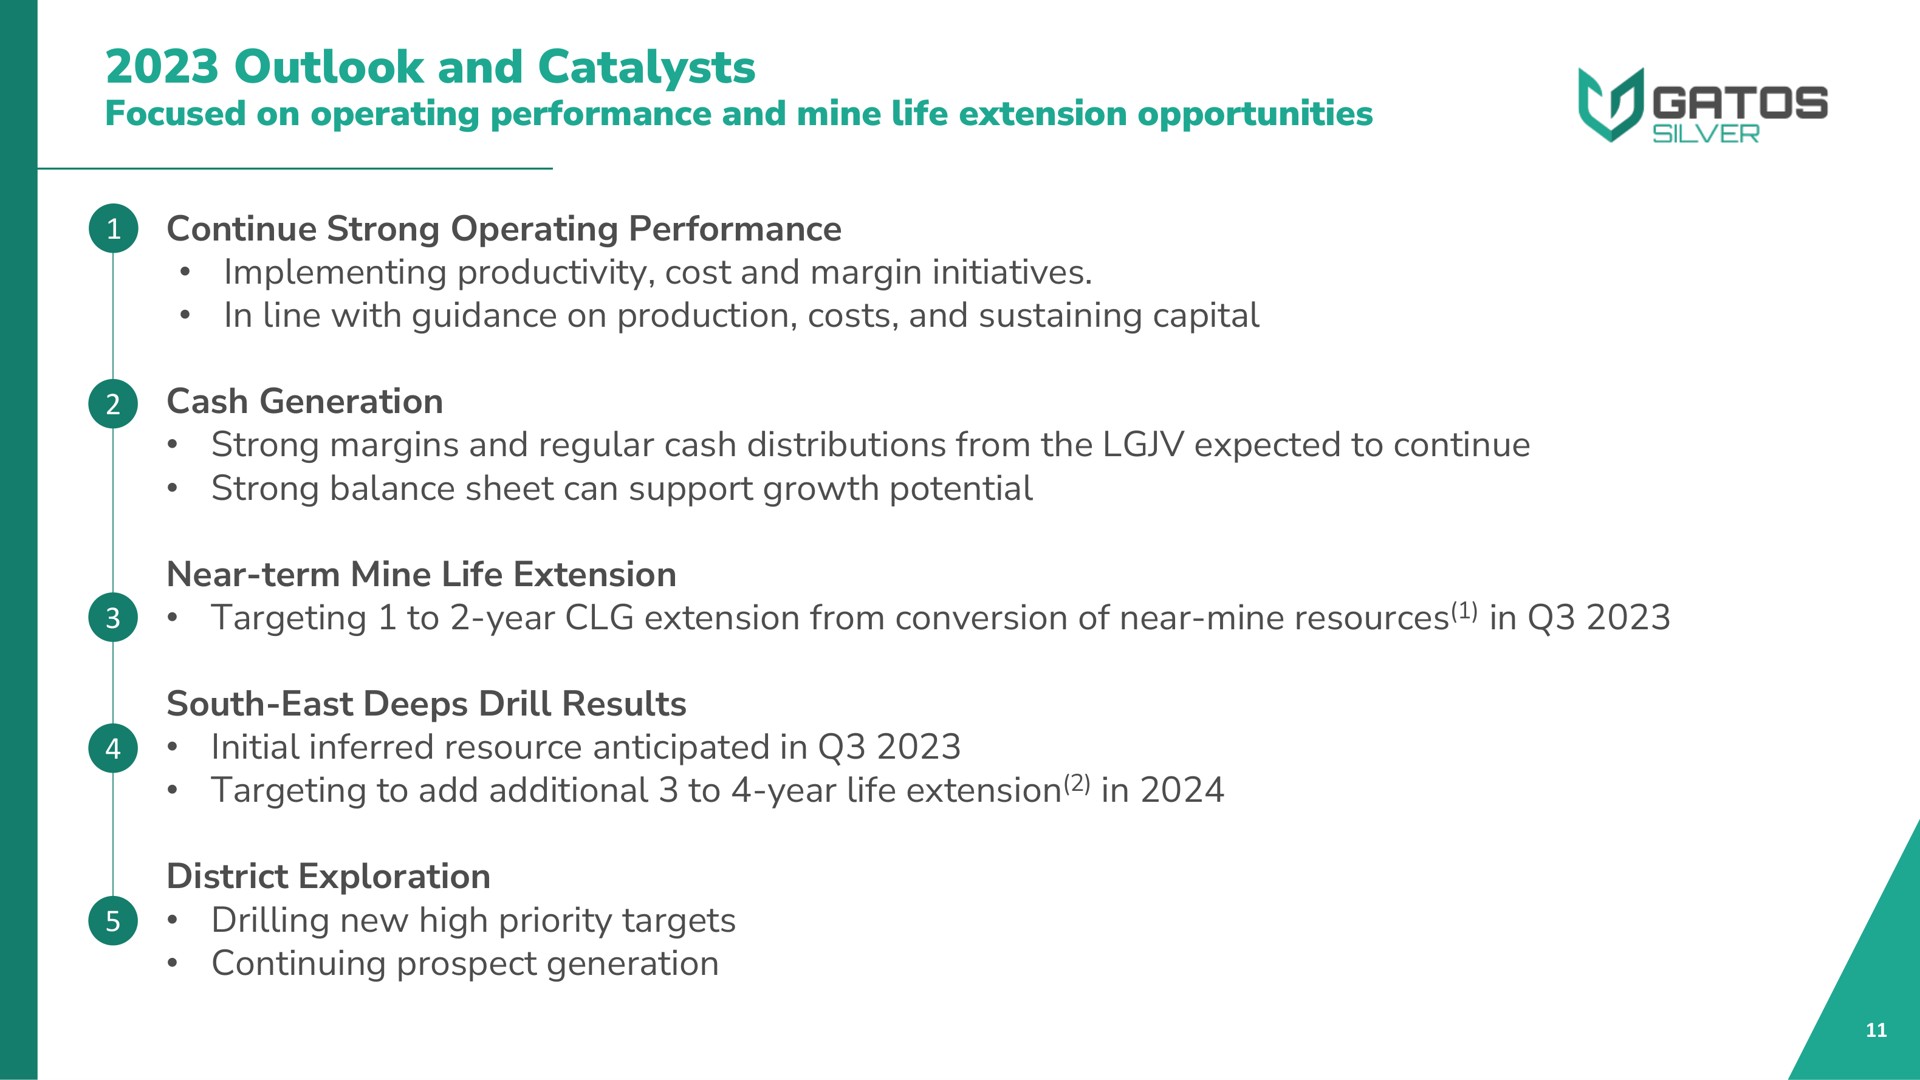 outlook and catalysts targeting to add additional to year life extension in | Gatos Silver